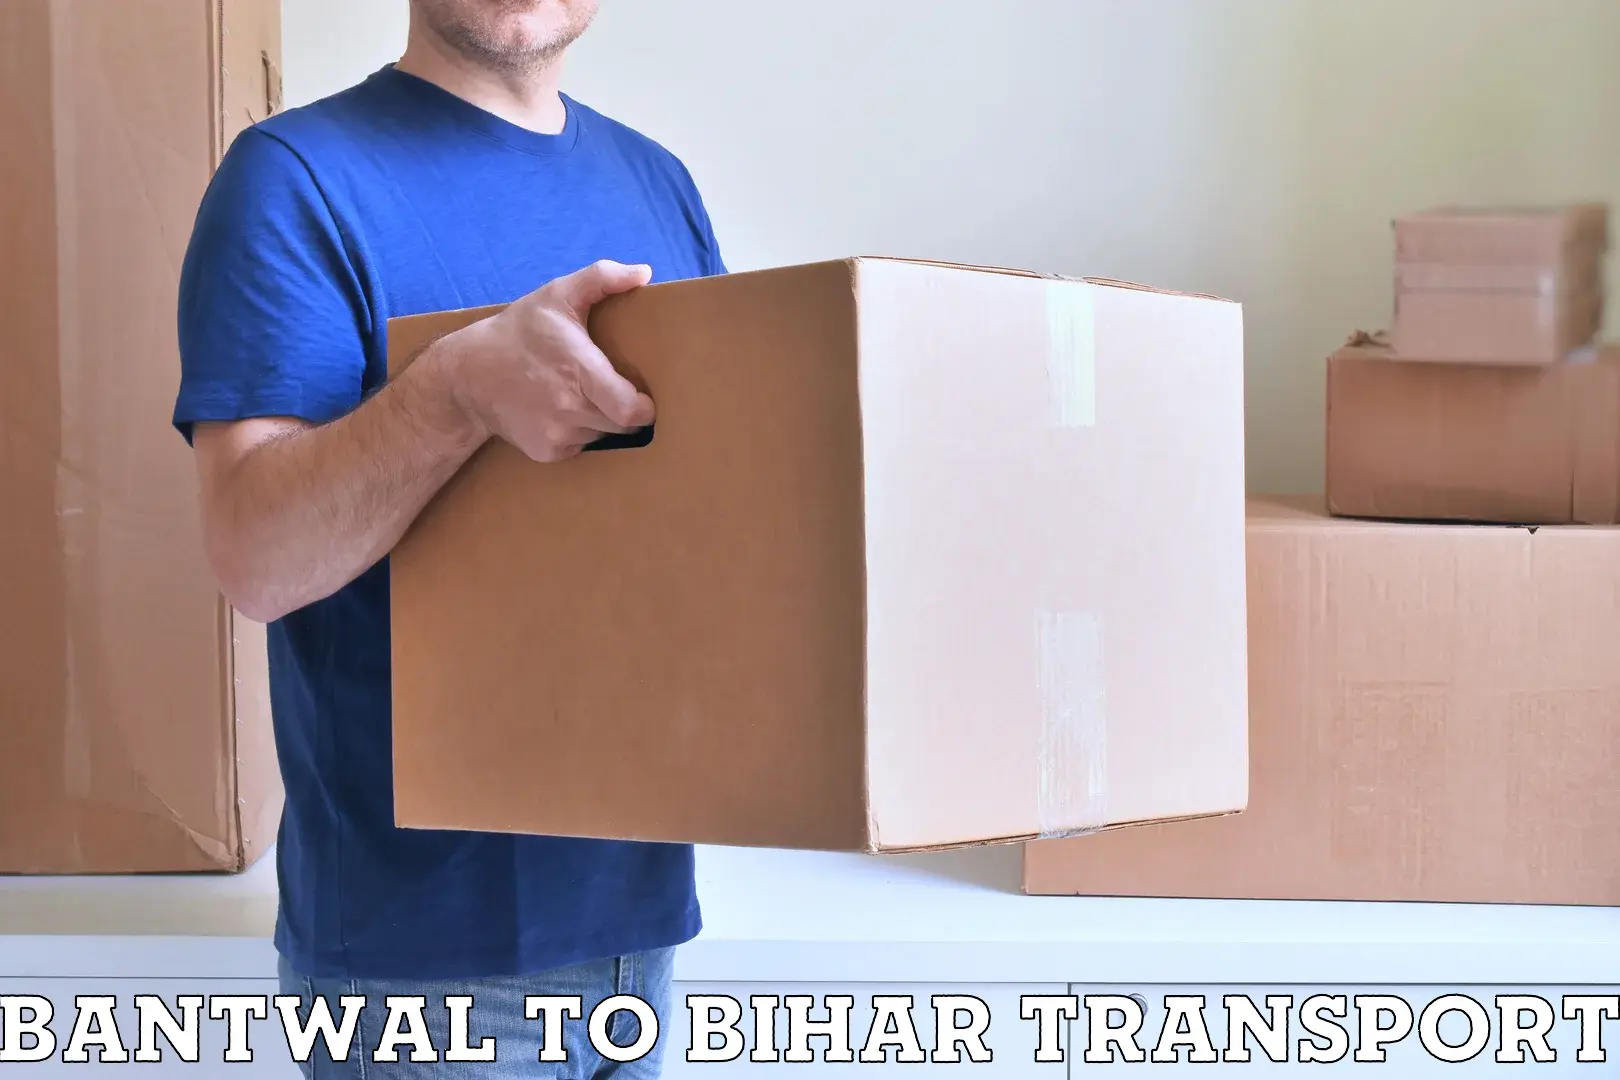 Container transport service Bantwal to Bihar